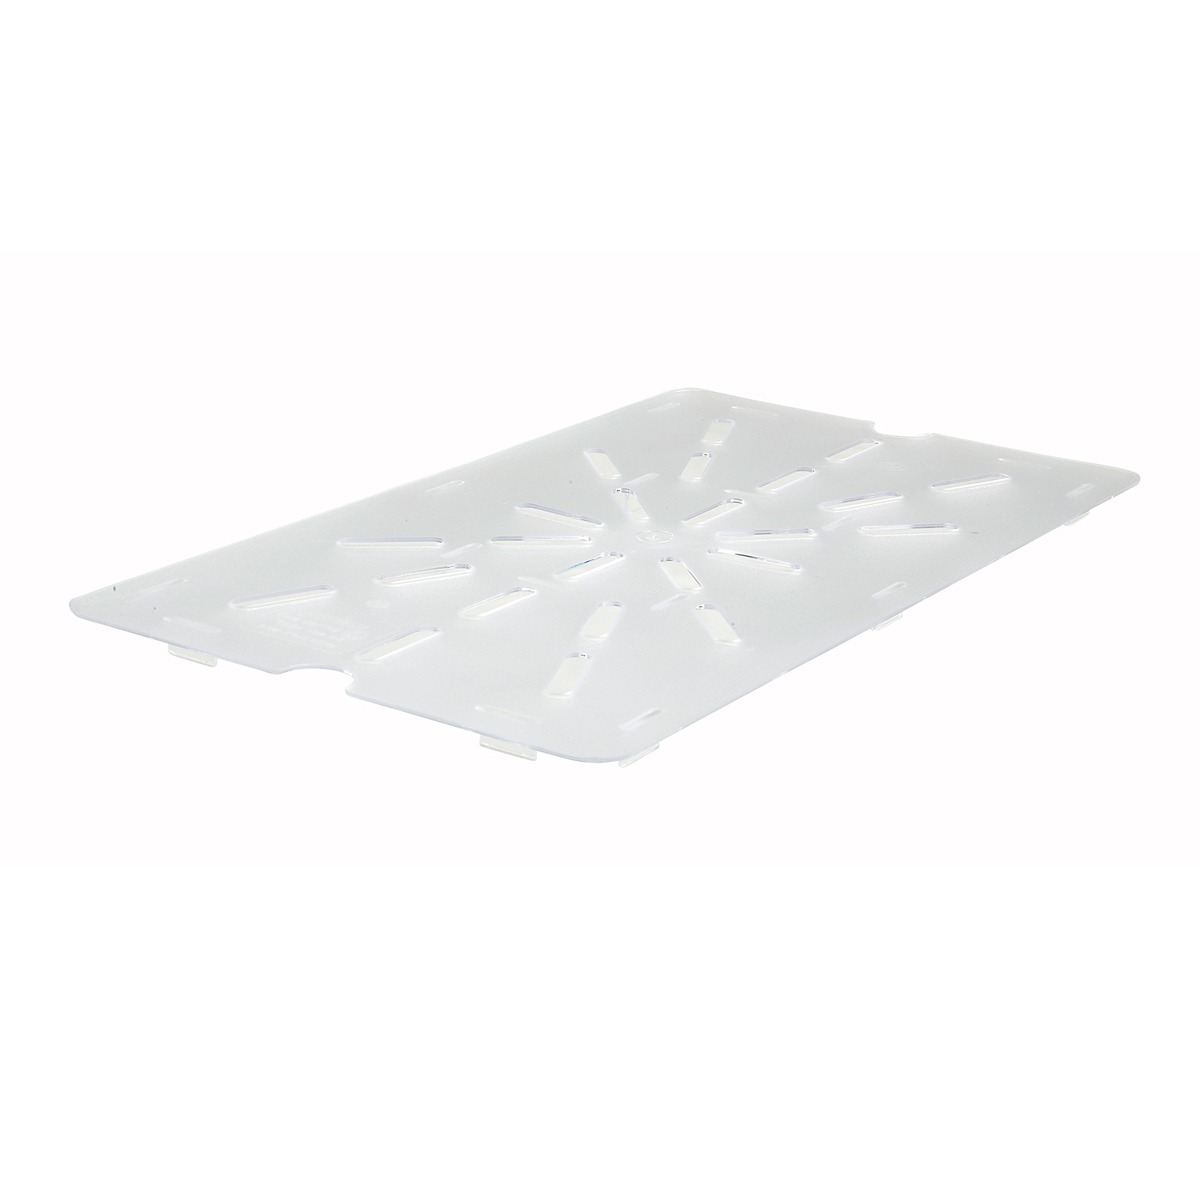 Winco SP71DS Poly Ware Polycarbonate Full Size Food Pan Drain Tray 18-5/16" x 10-1/4"